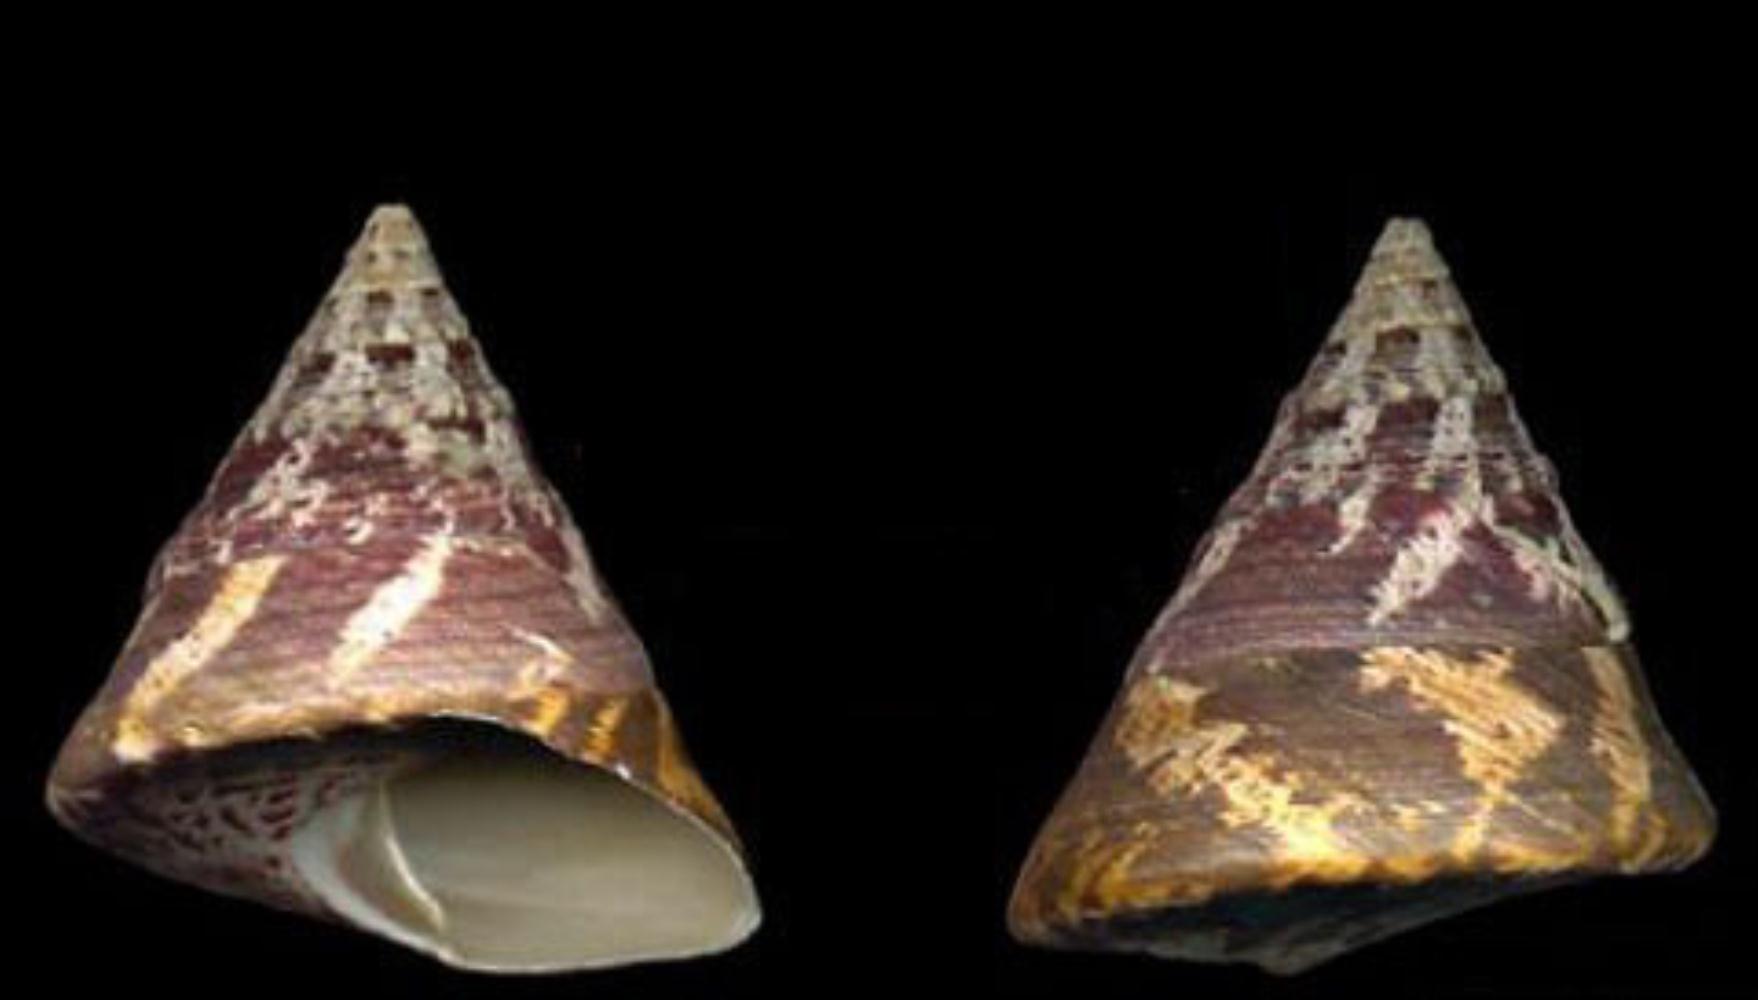 Top Shell